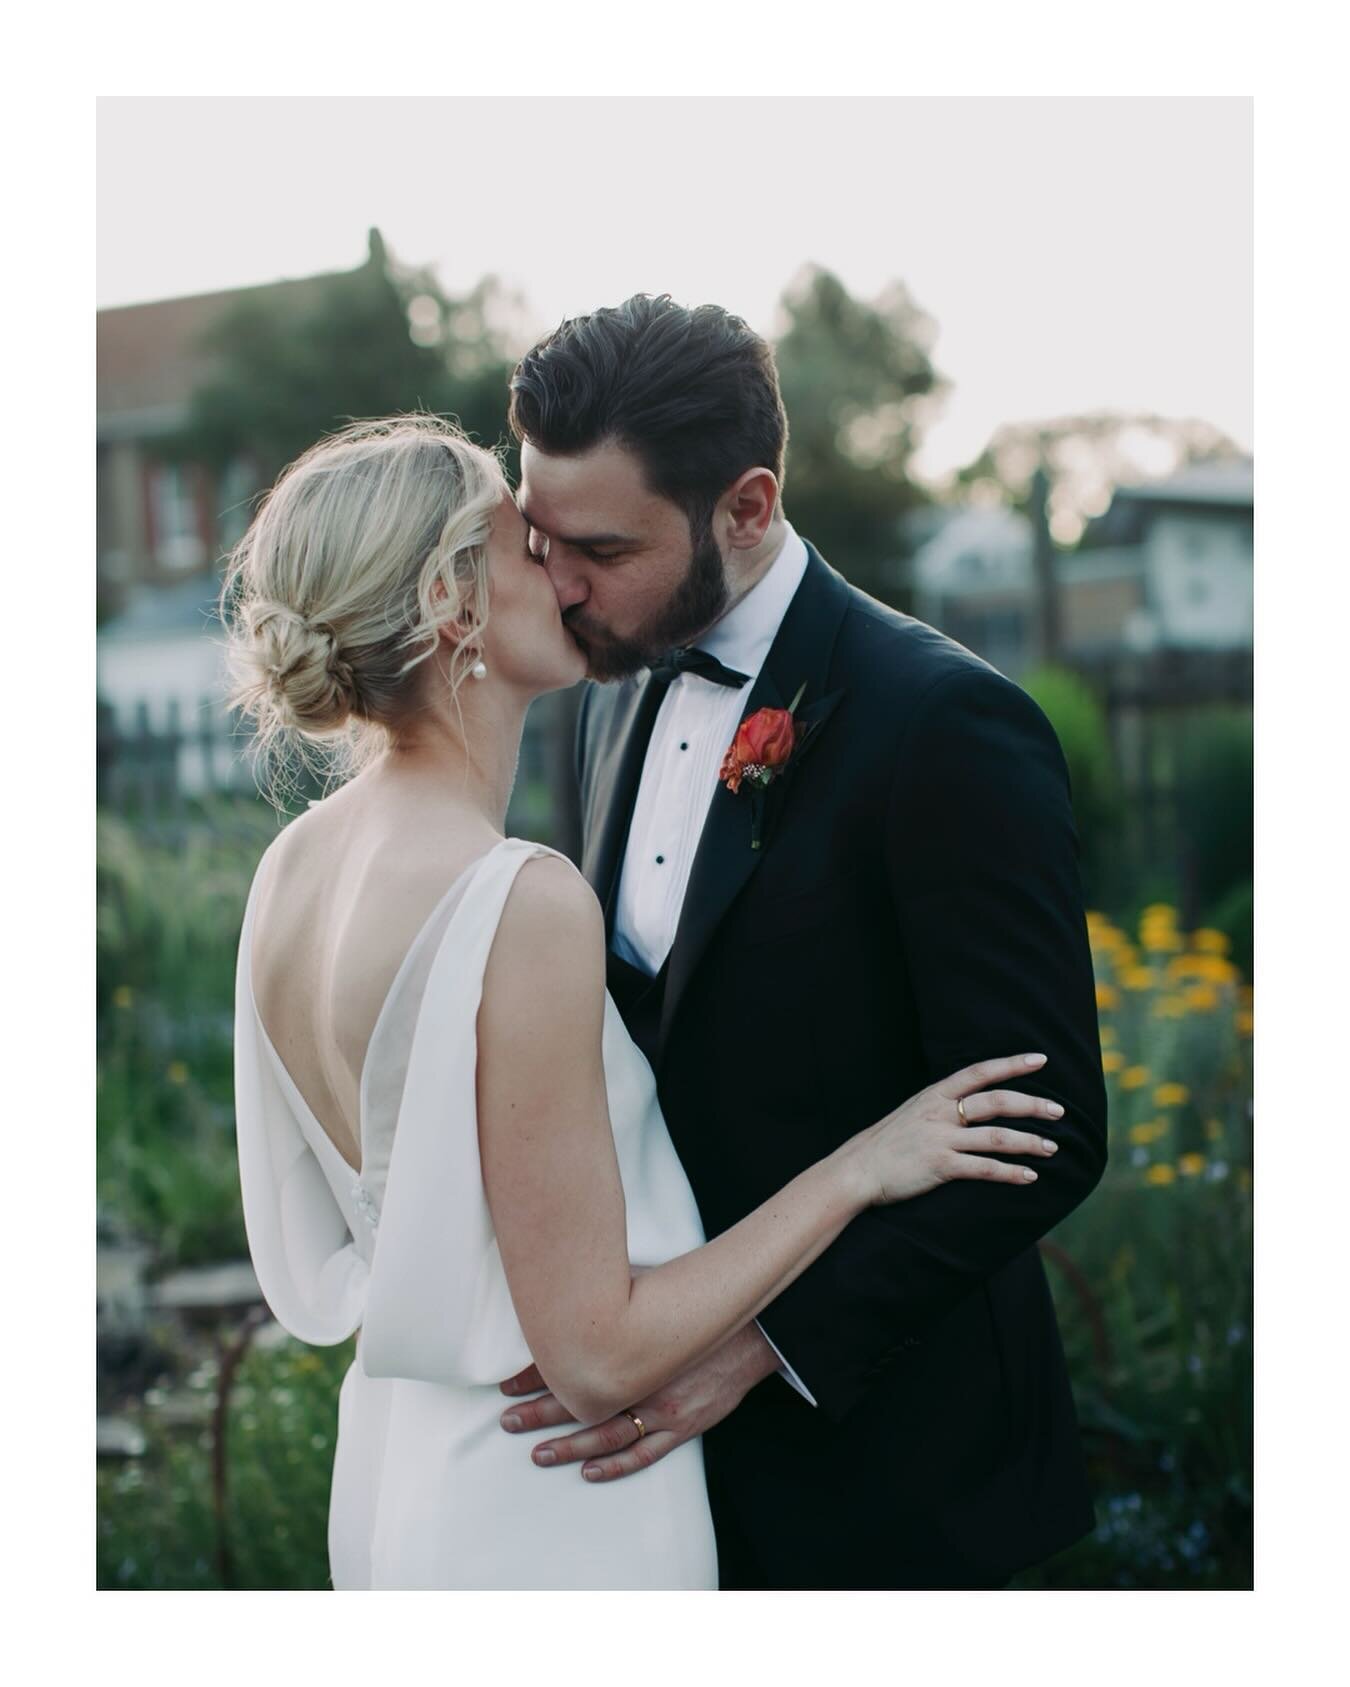 I always suggest to couples they take a few minutes to step outside of their reception either around sunset or after dark to soak in their day. It also provides an opportunity for a few extra pics in some lovely light, such as this pic with Erin &amp